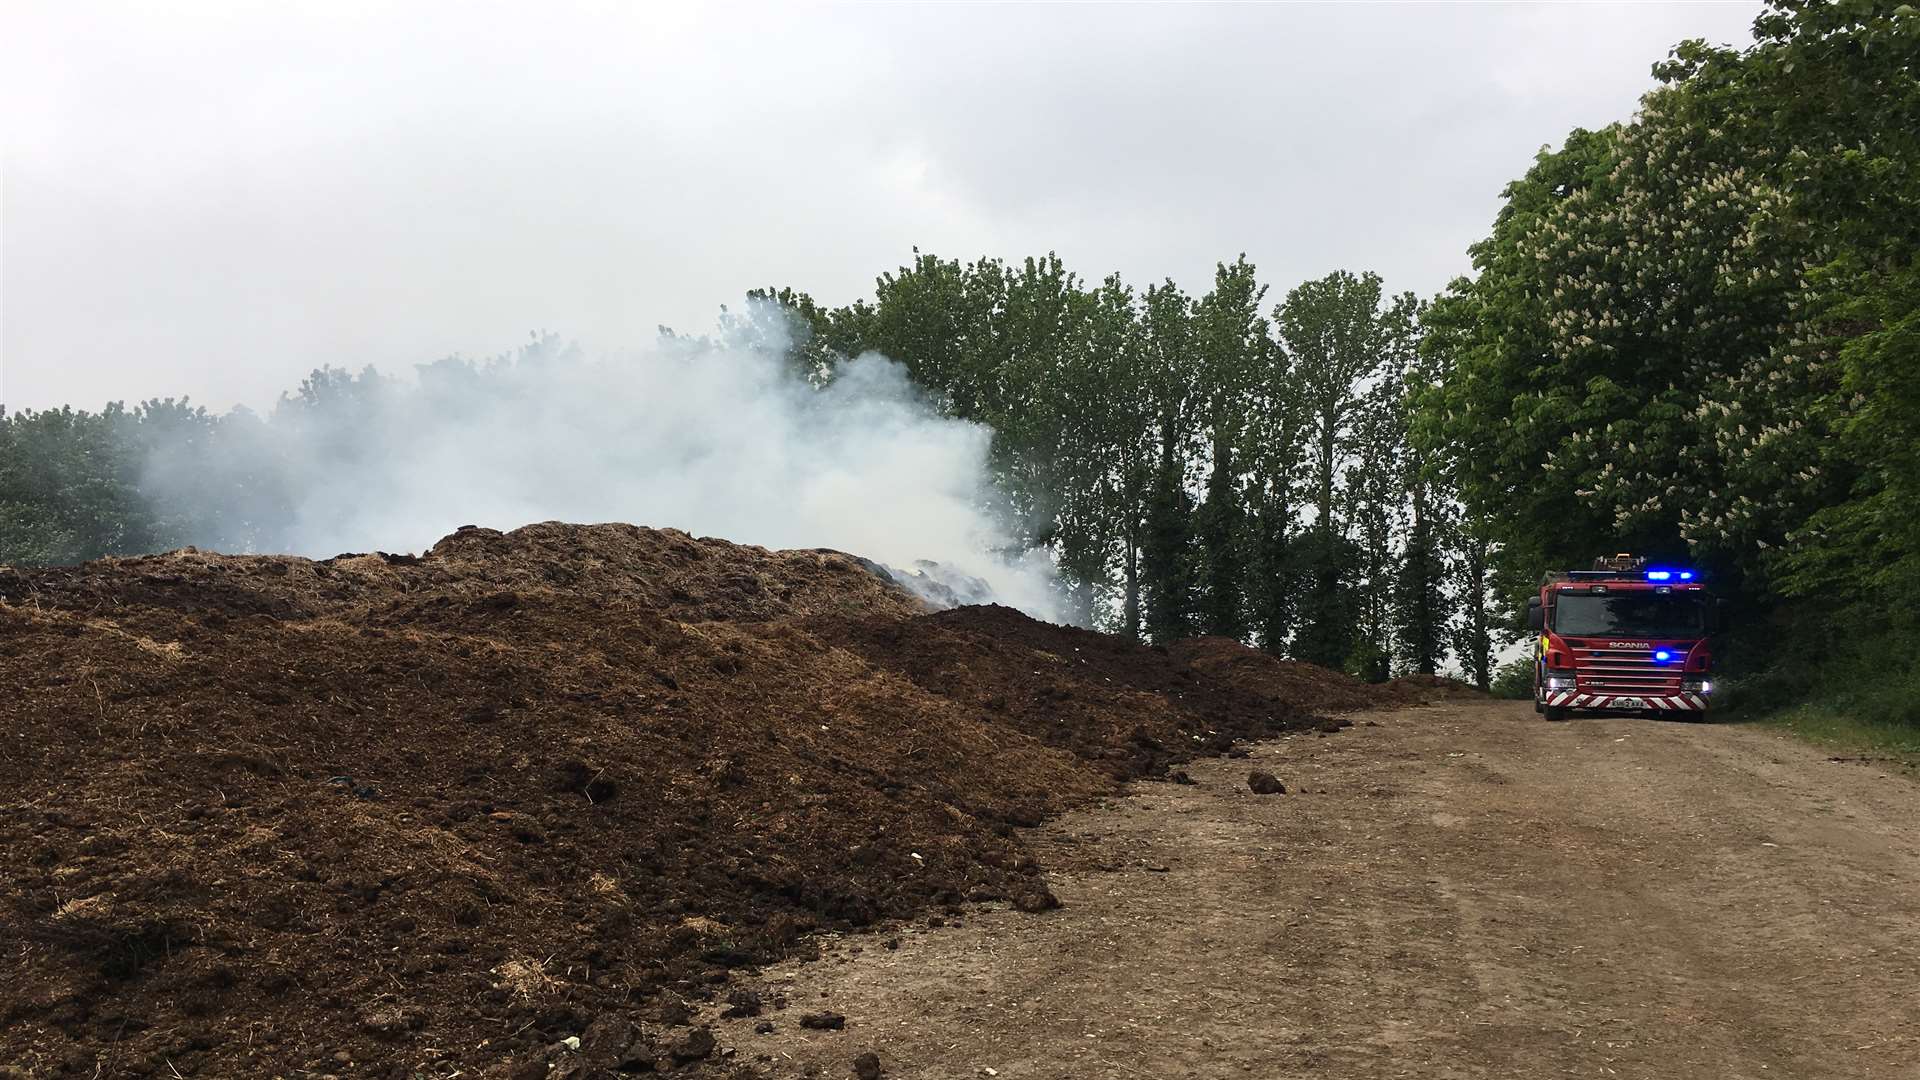 The pile of manure smoked a lot, picture KFRS.